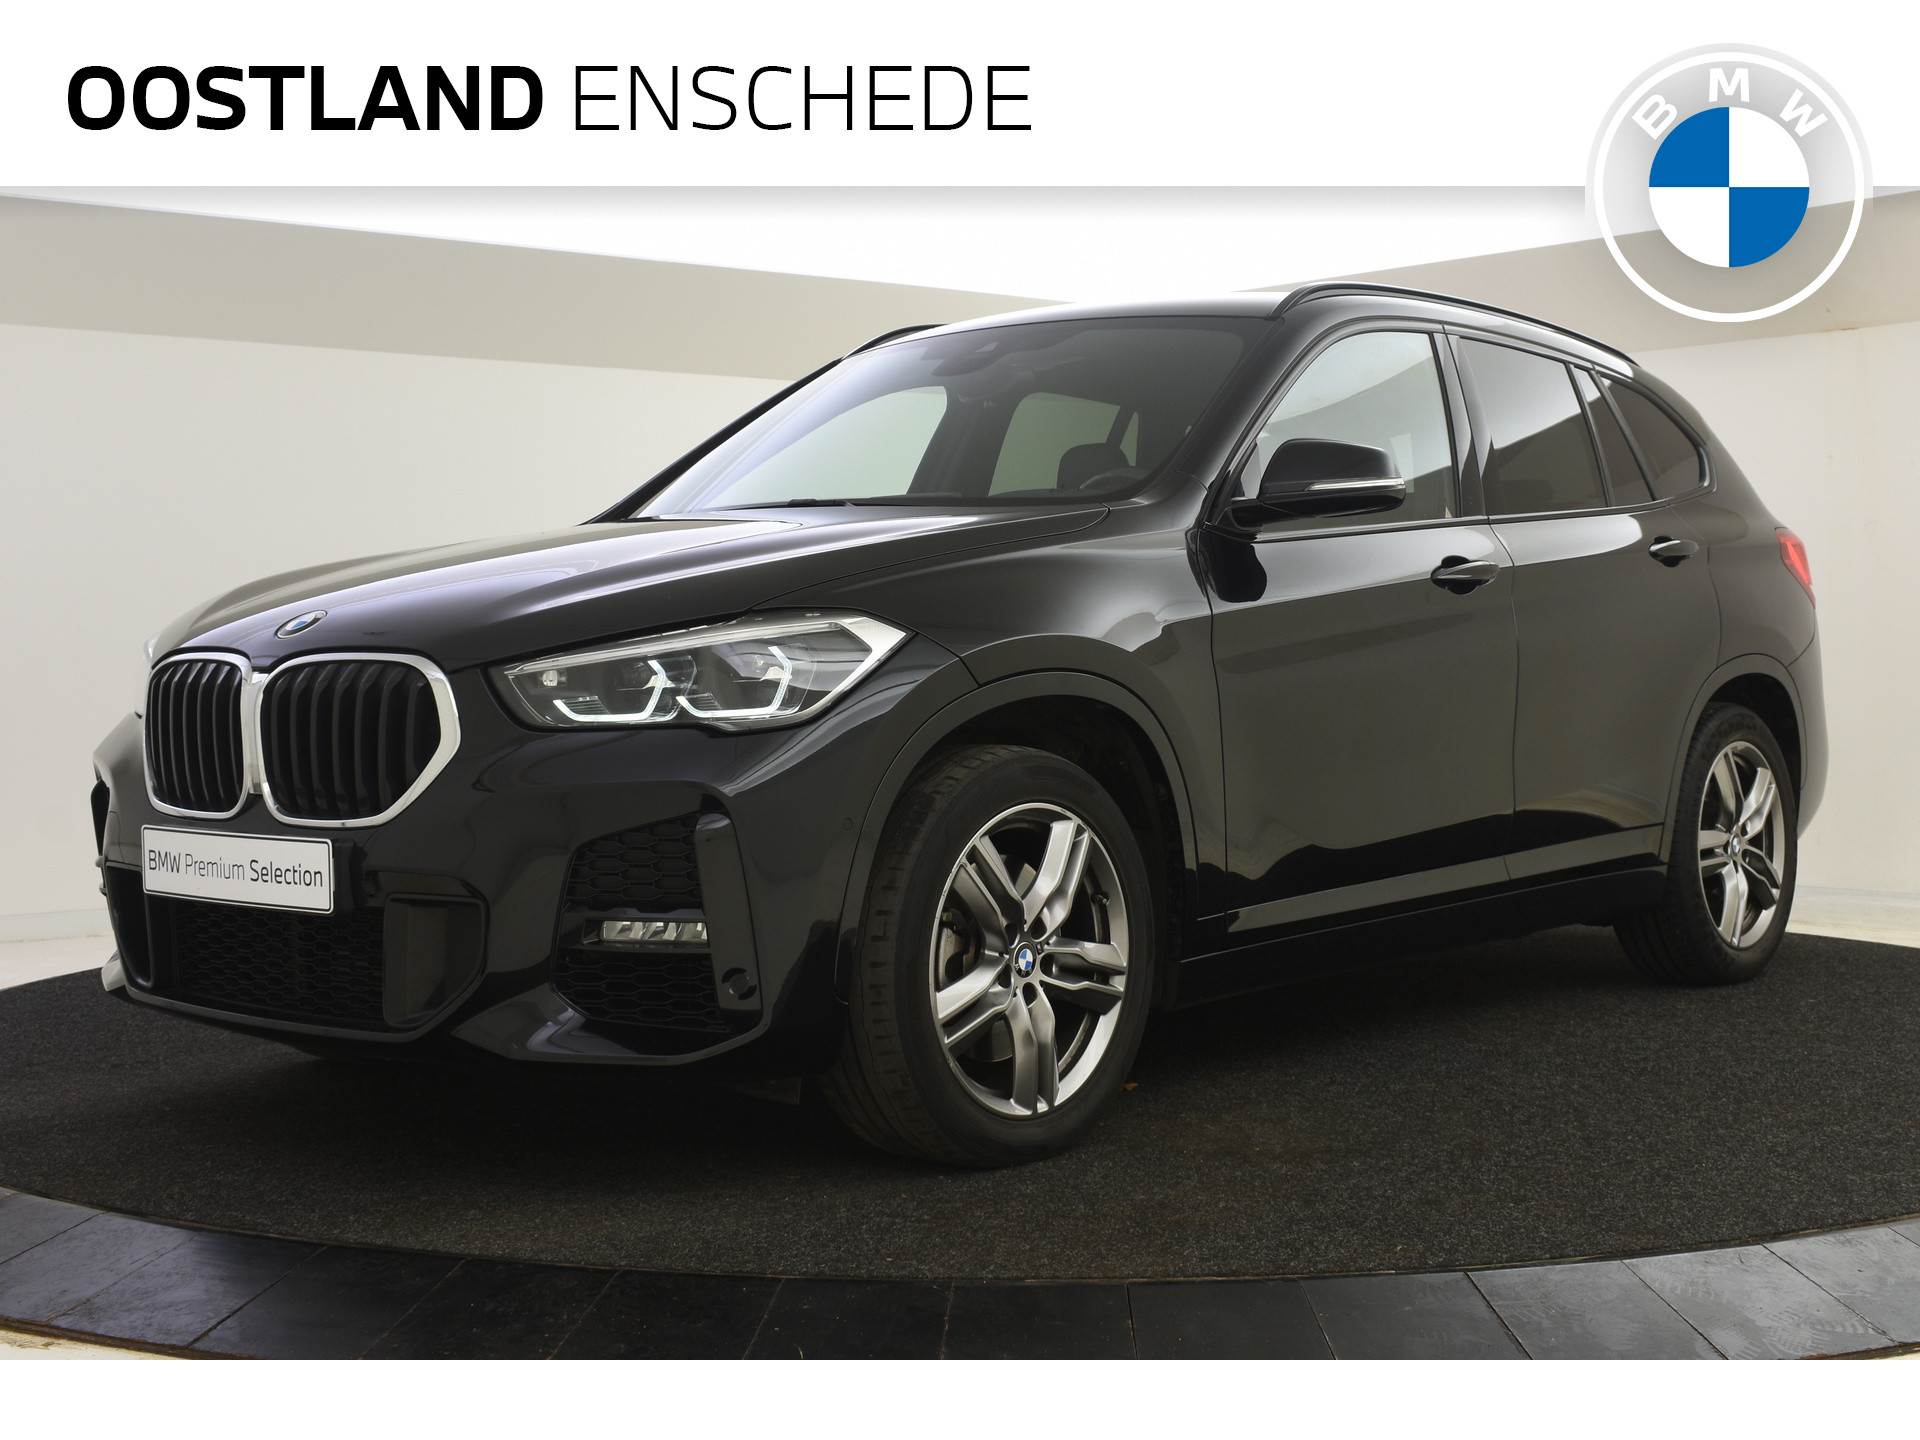 BMW X1 sDrive20i Executive M Sport Automaat / Sportstoelen / Adaptieve LED / Active Cruise Control / Achteruitrijcamera / Head-Up / Park Assistant / Driving Assistant Plus